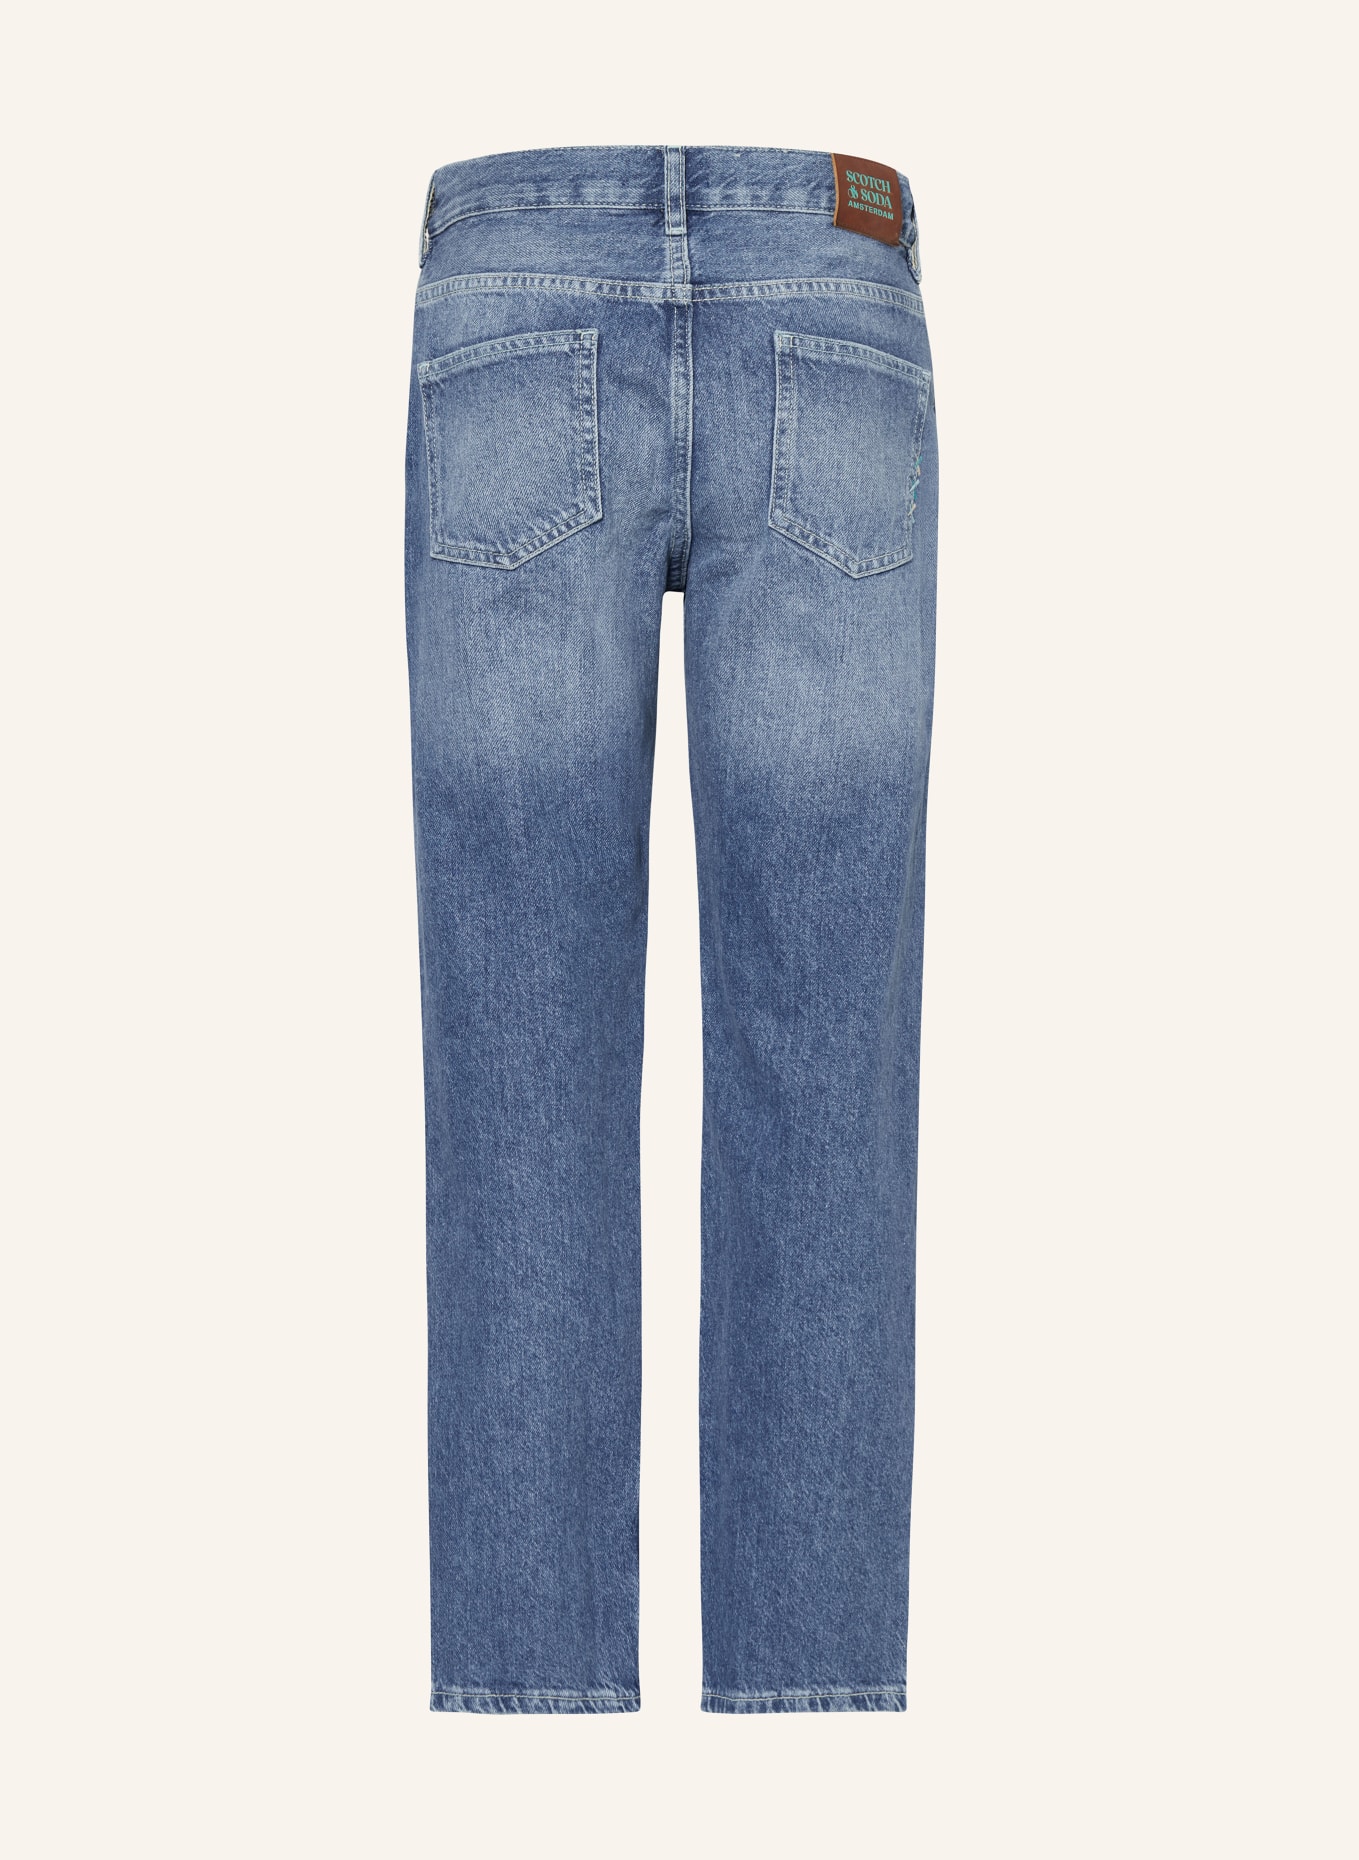 SCOTCH & SODA Jeans THE PITCH Loose Fit, Farbe: 7050 All At Sea (Bild 2)